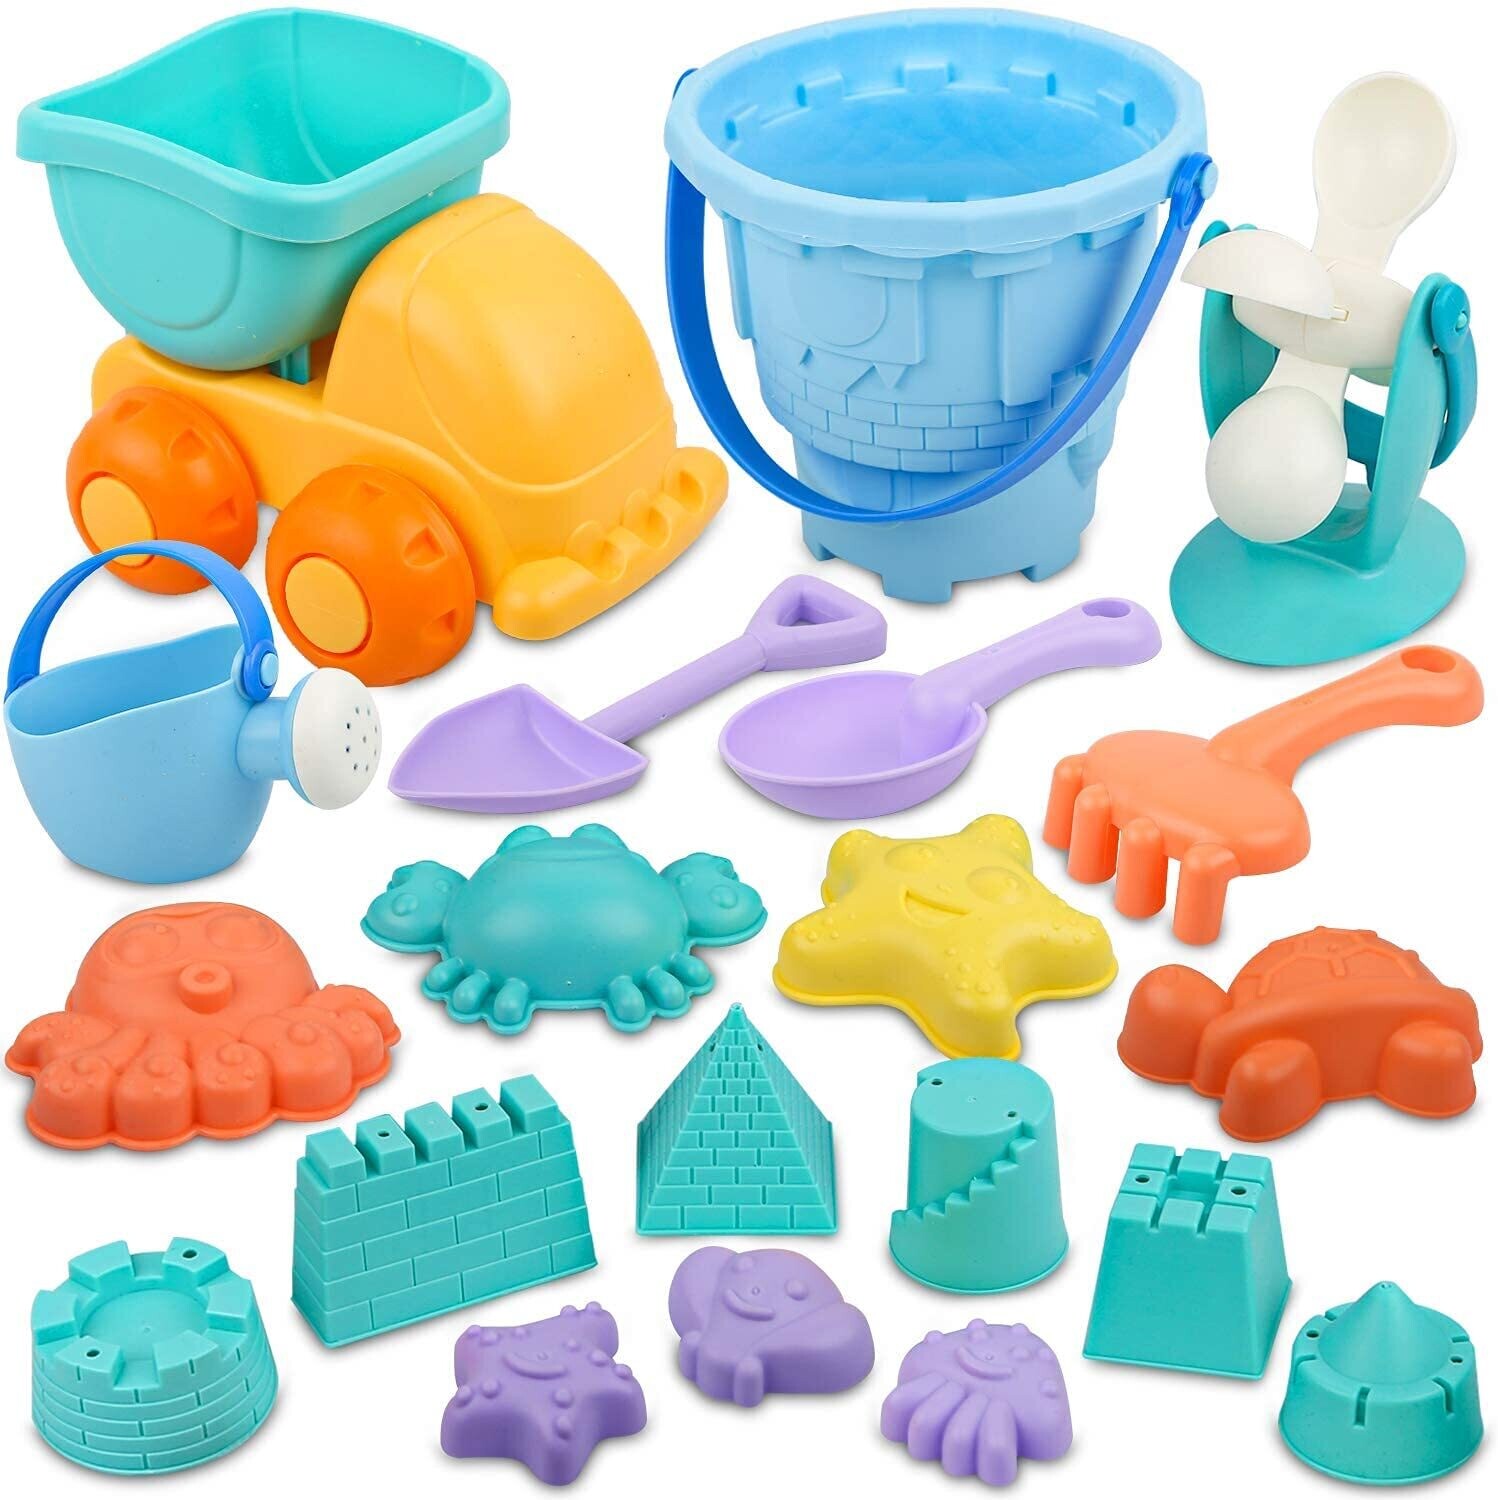 Sand Beach Toys for Kid Soft Plastic Material